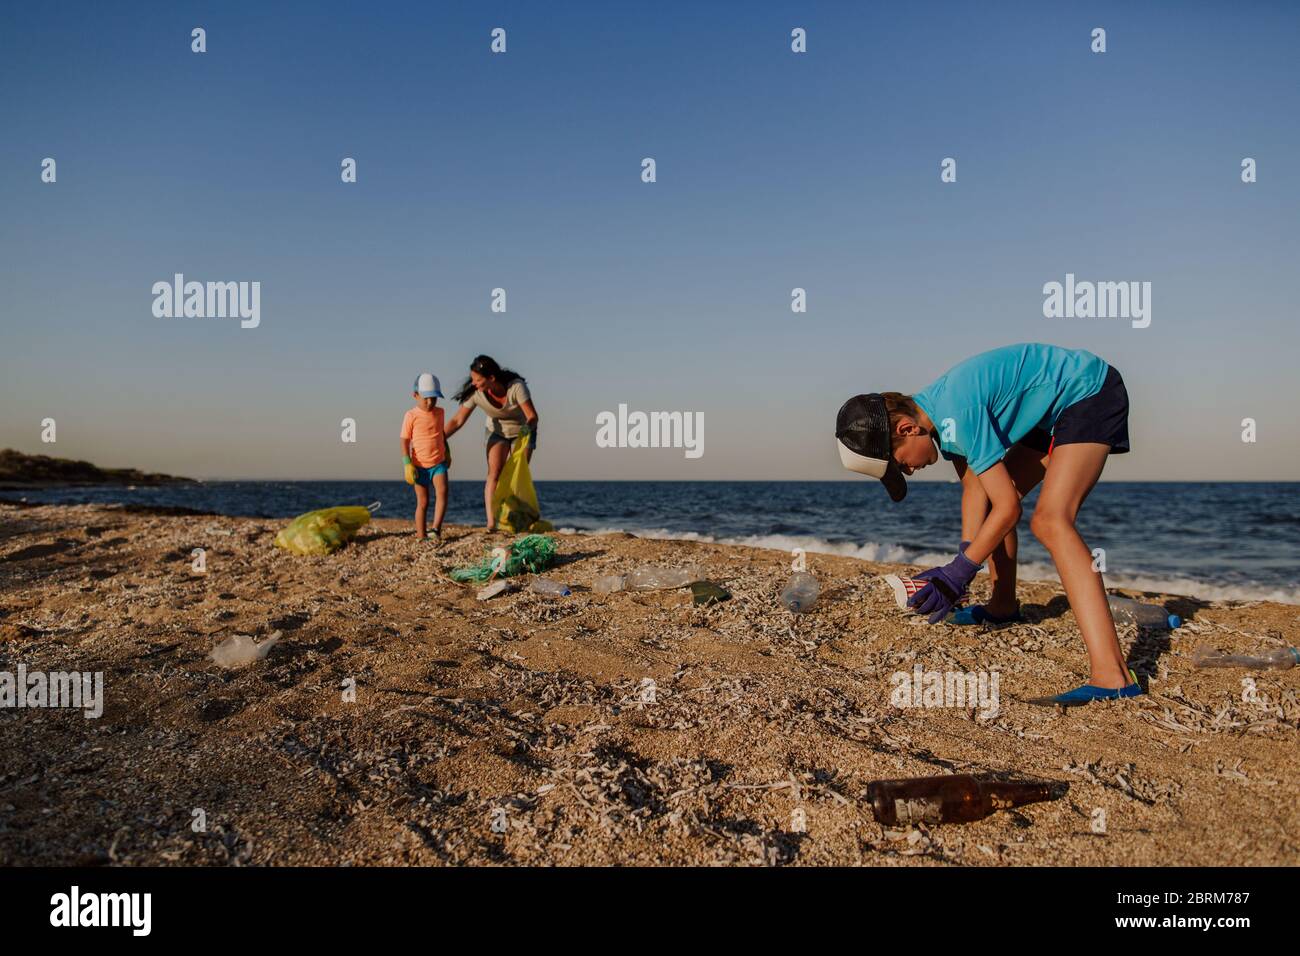 Boy collecting litter on beach with his mother and brother. Two boys and woman picking up garbage found on the beach and putting it into plastic bin. Stock Photo